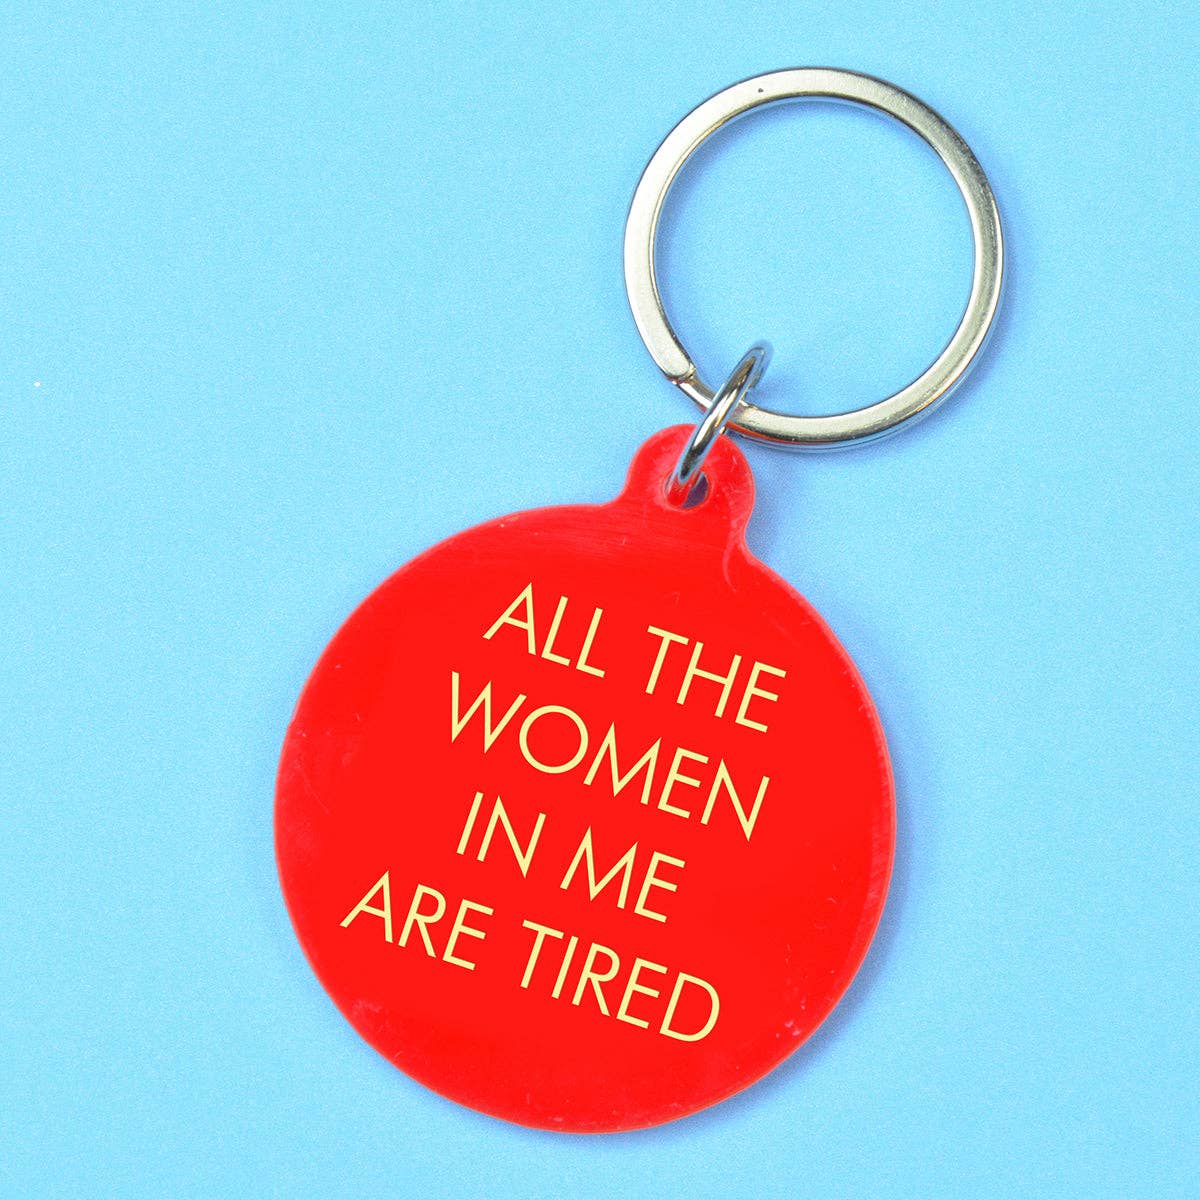 Flamingo Candles - All the Women in Me are Tired Keytag